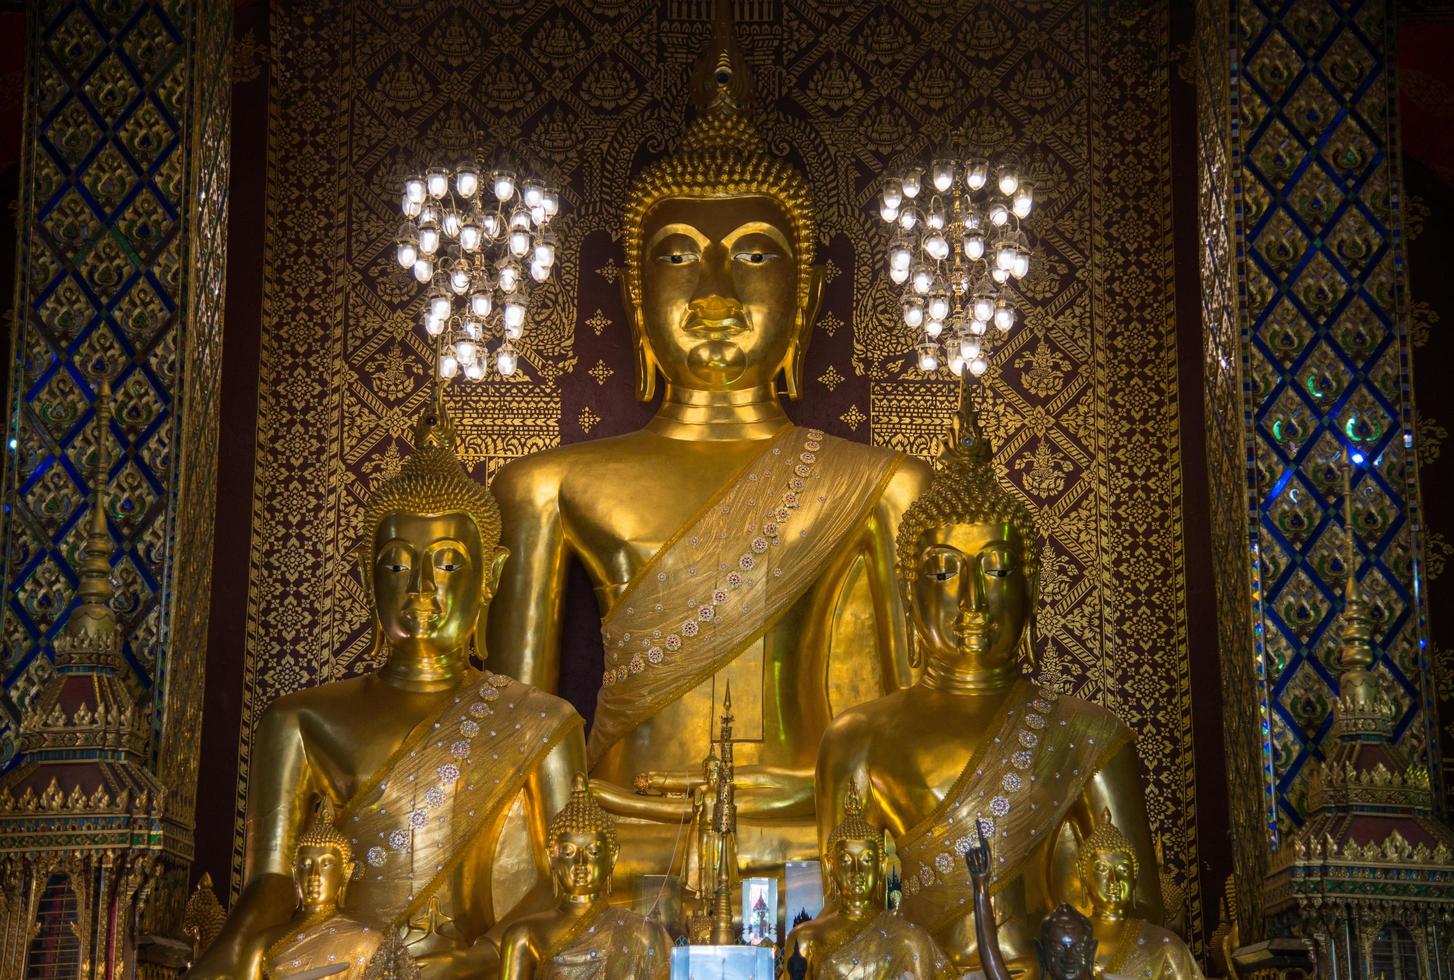 The Buddha statue in viharn of Wat Phra That Hariphunchai the iconic famous temple in Lamphun city, Northern Thailand. photo